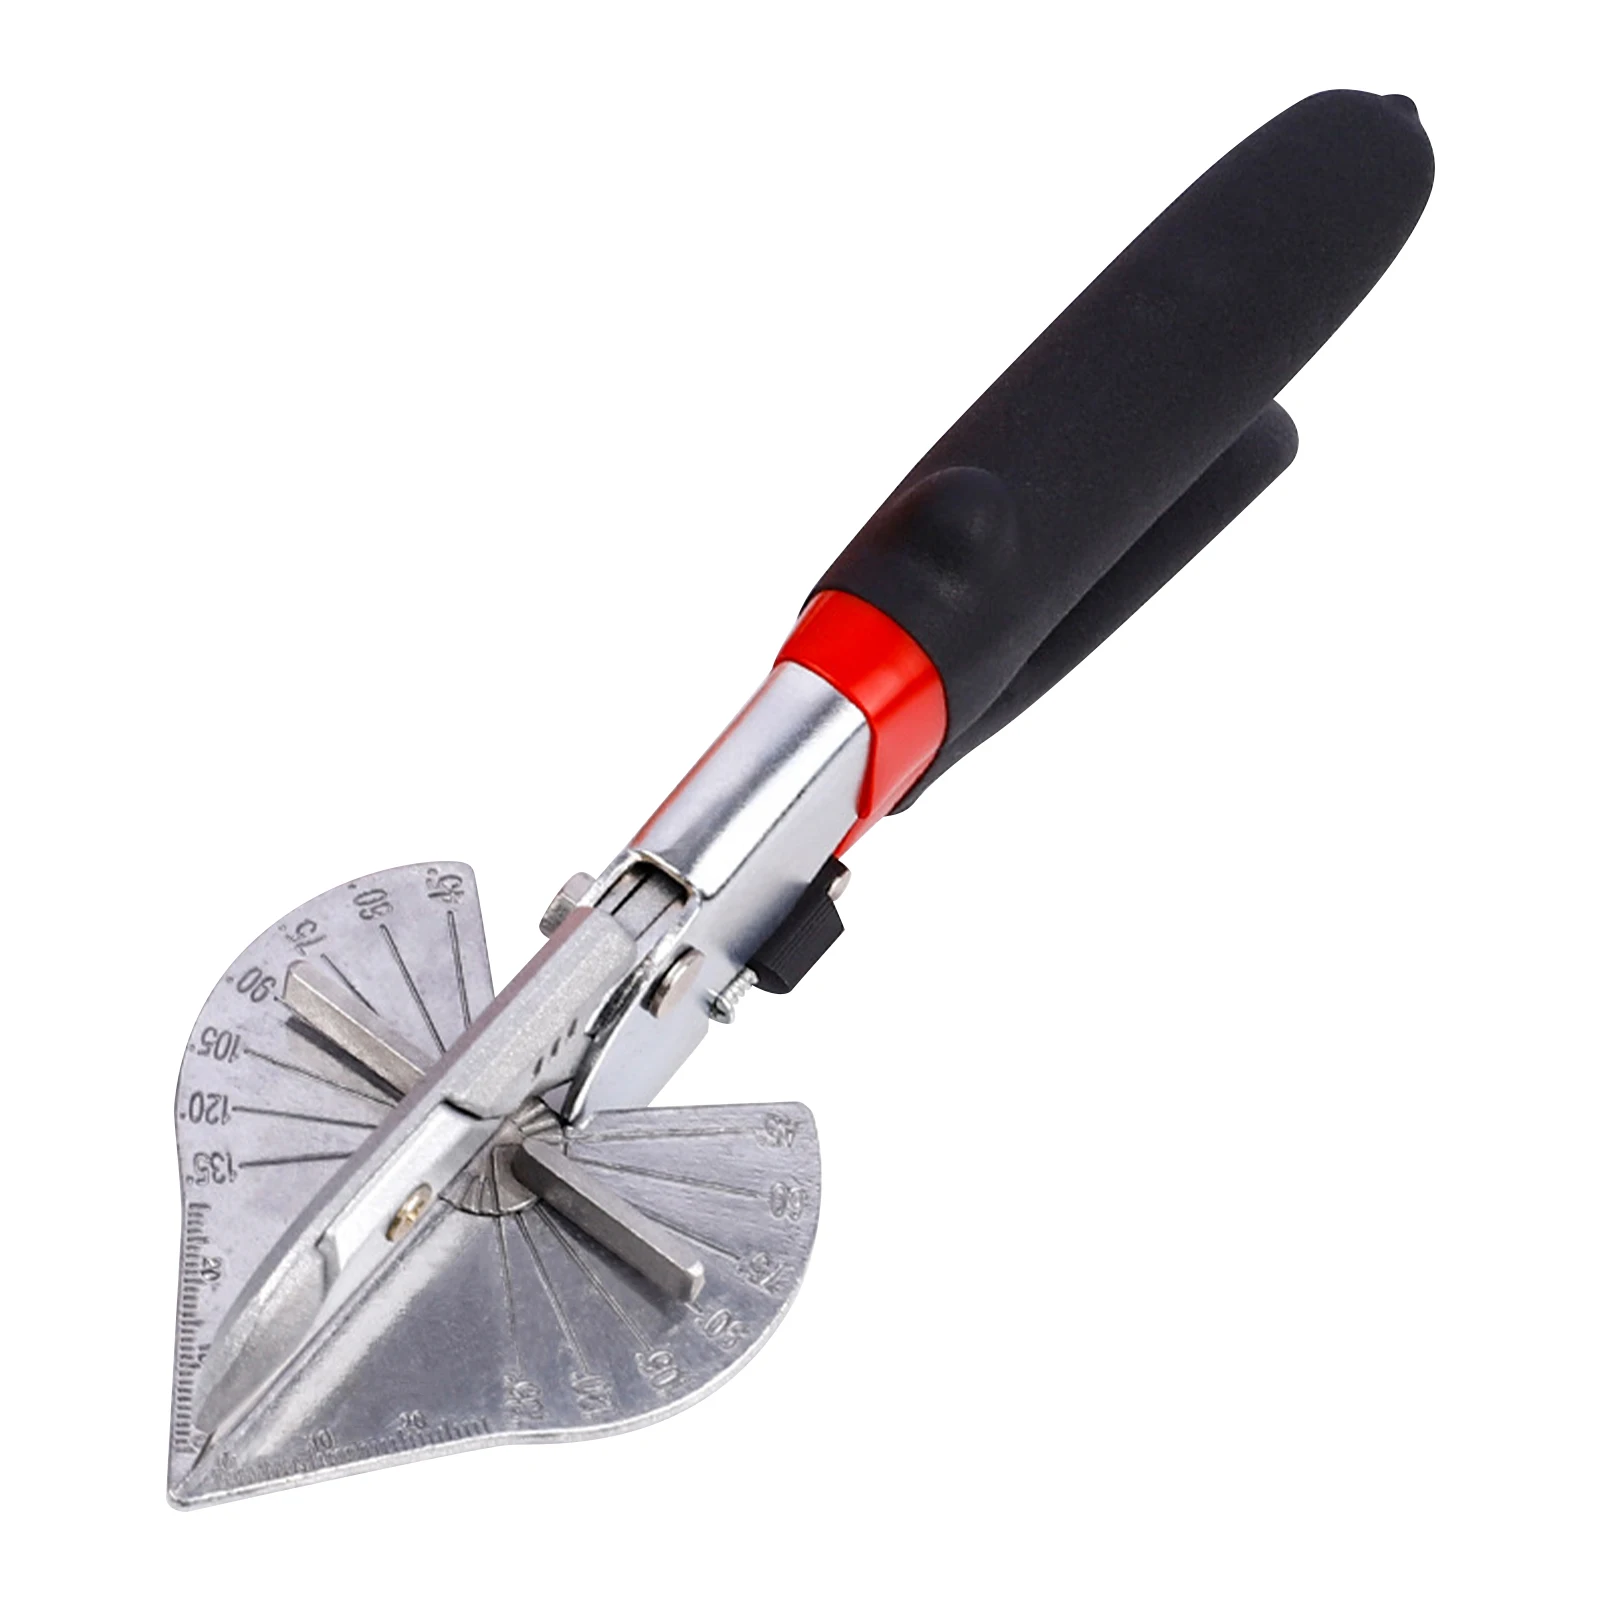 

Cutting Gasket Locking Hand Tool Anti Rust Multi Angle Decking Easy Grip Miter Shear With 45-135 Degree Moulding Trim Trunking